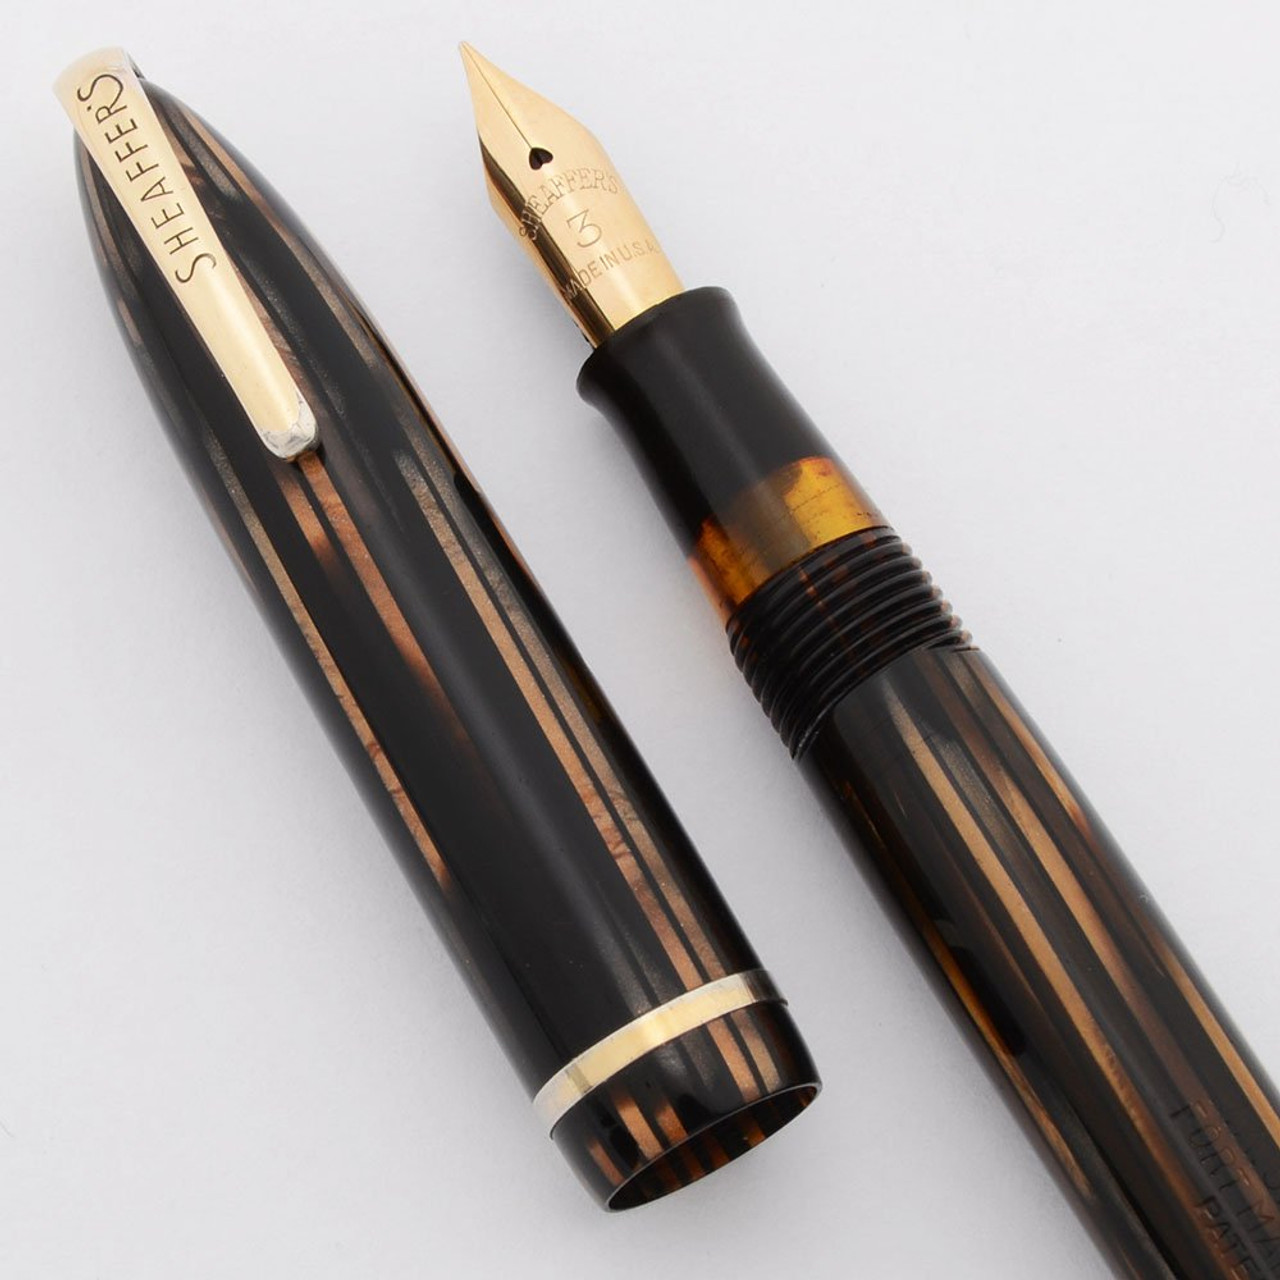 Sheaffer Balance 400 "Commandant" - Brown Striated, Military Clip, Lever, Extra Fine #3 Nib (Excellent, Restored)